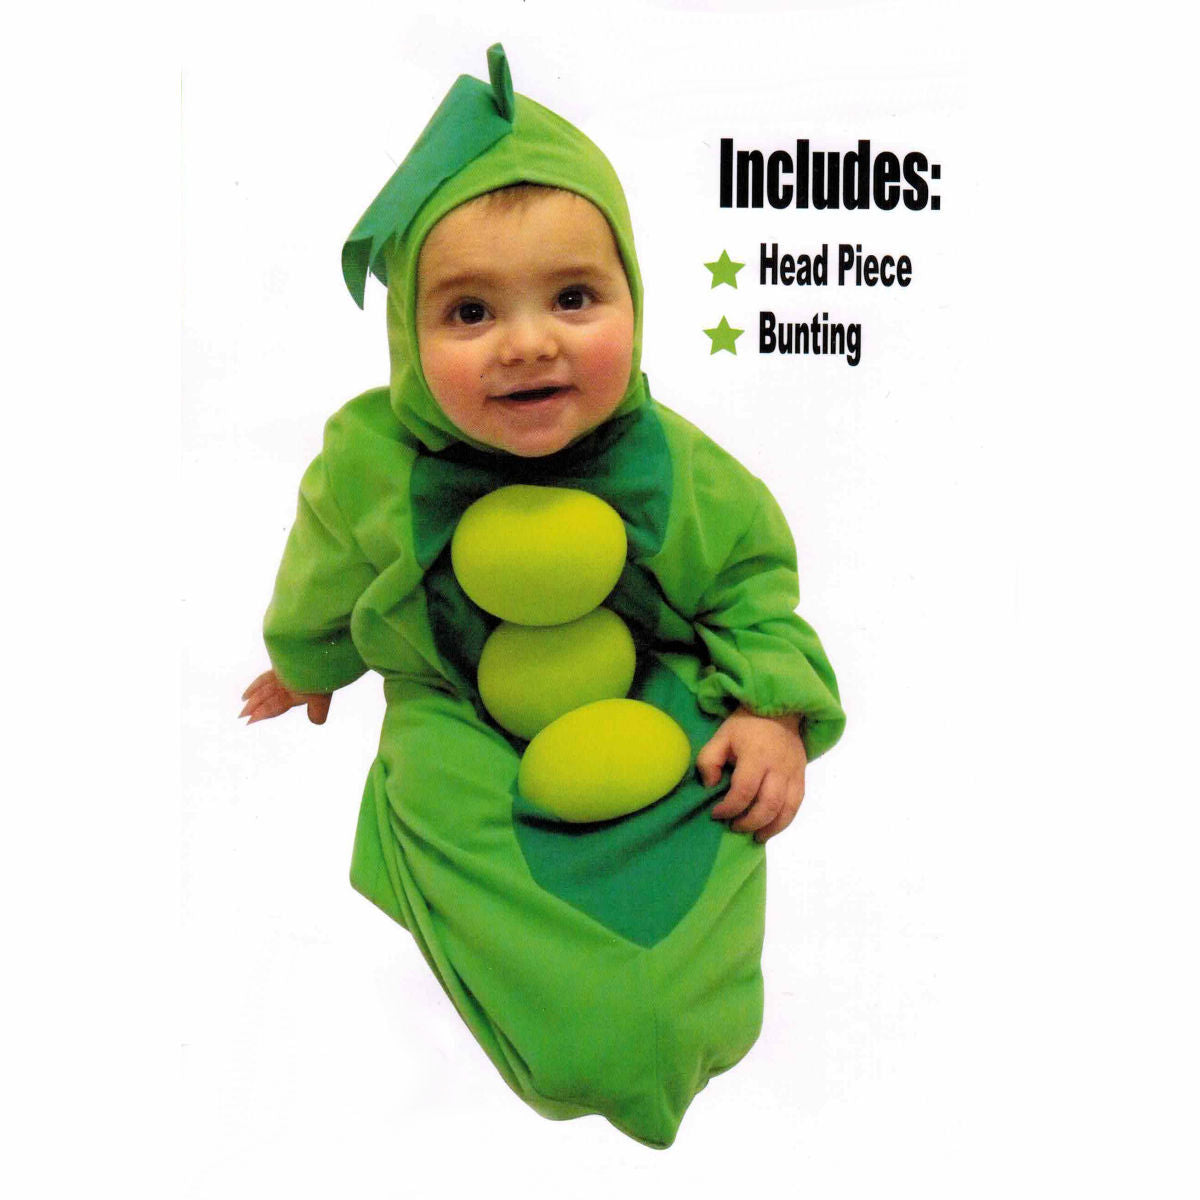 Pea in the Pod Baby Infant fancy dress costume Very Cute